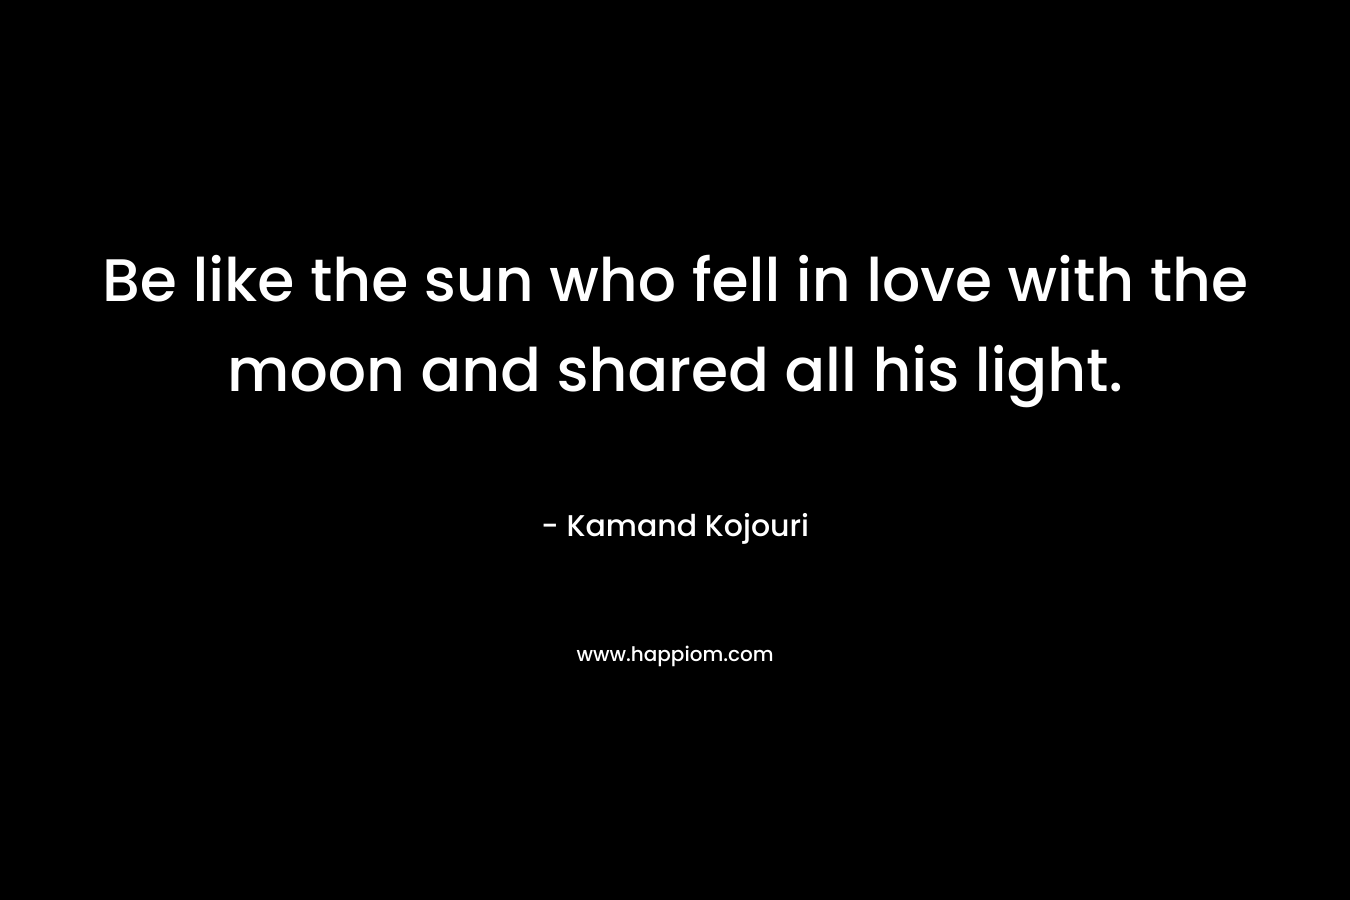 Be like the sun who fell in love with the moon and shared all his light.